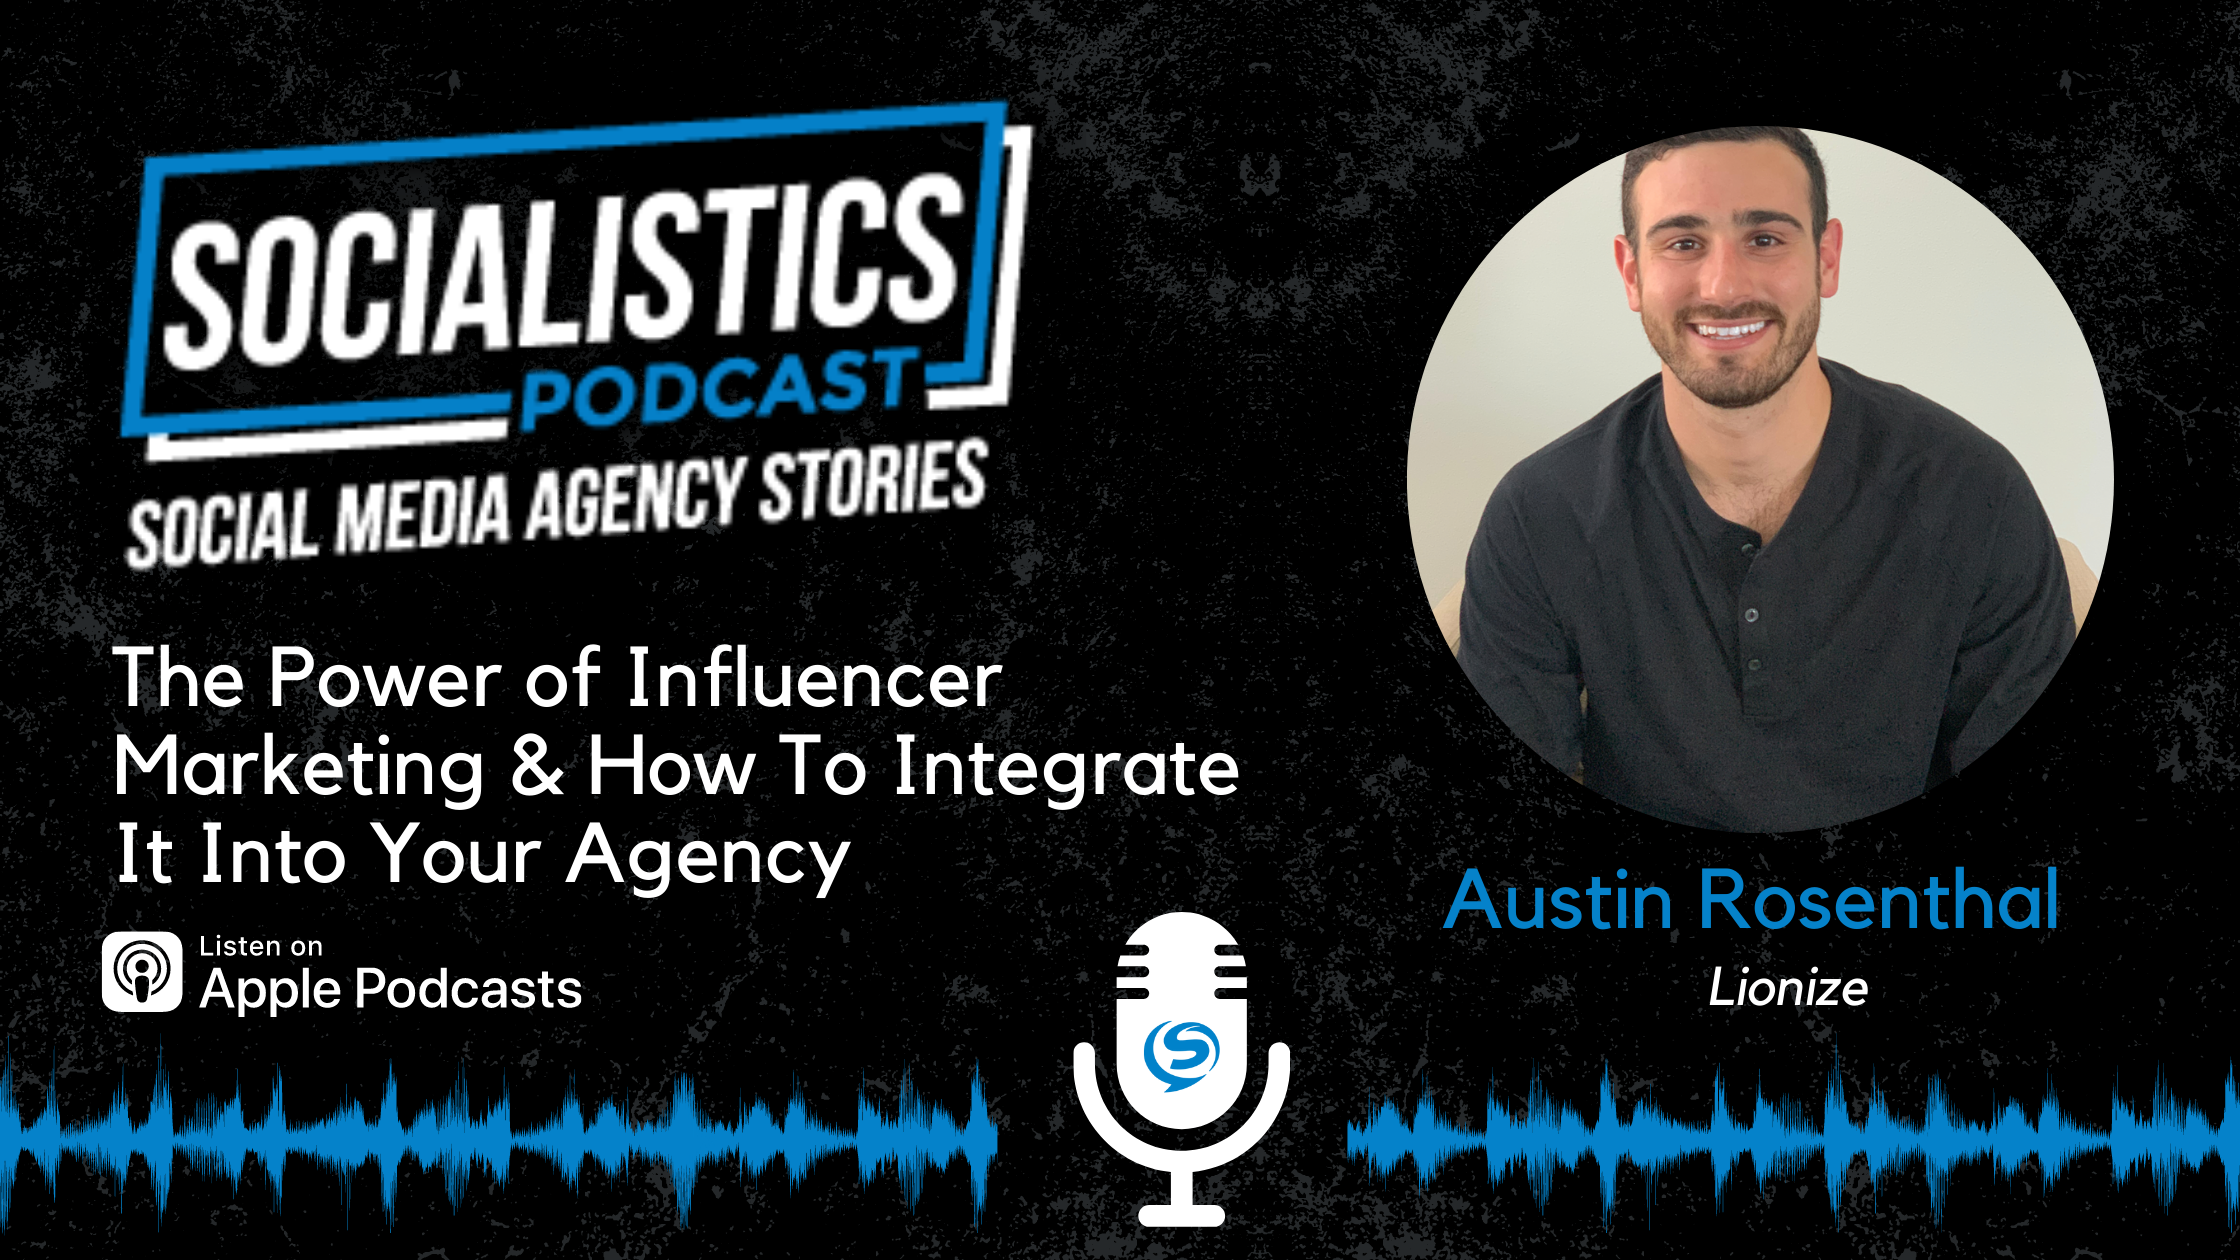 The Power of Influencer Marketing & How To Integrate It Into Your Agency